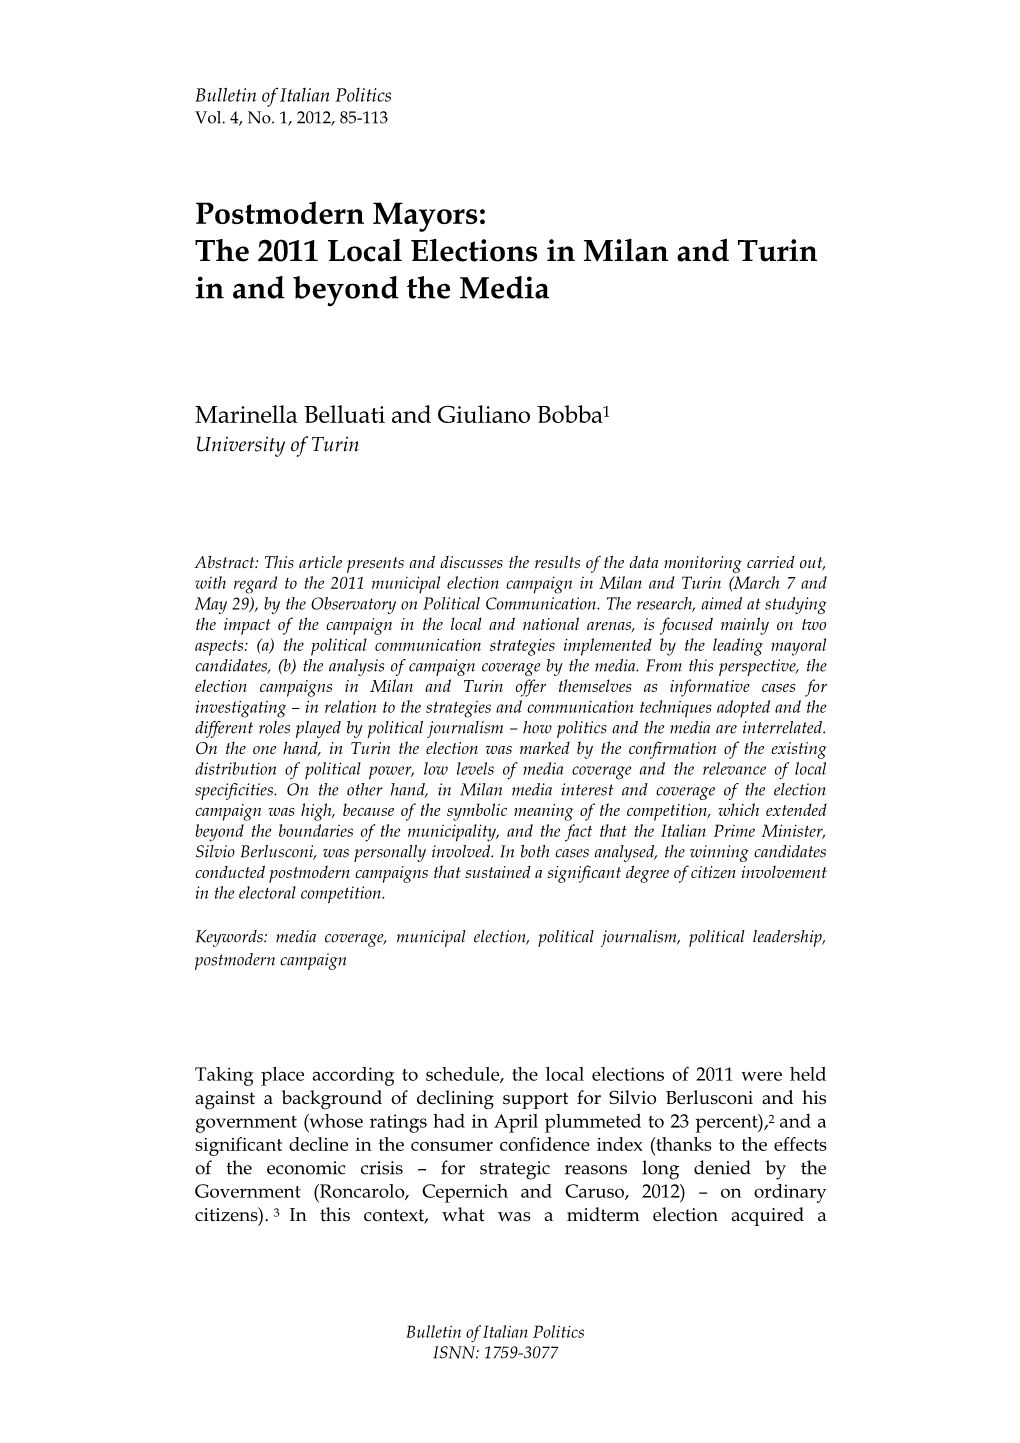 Postmodern Mayors: the 2011 Local Elections in Milan and Turin in and Beyond the Media